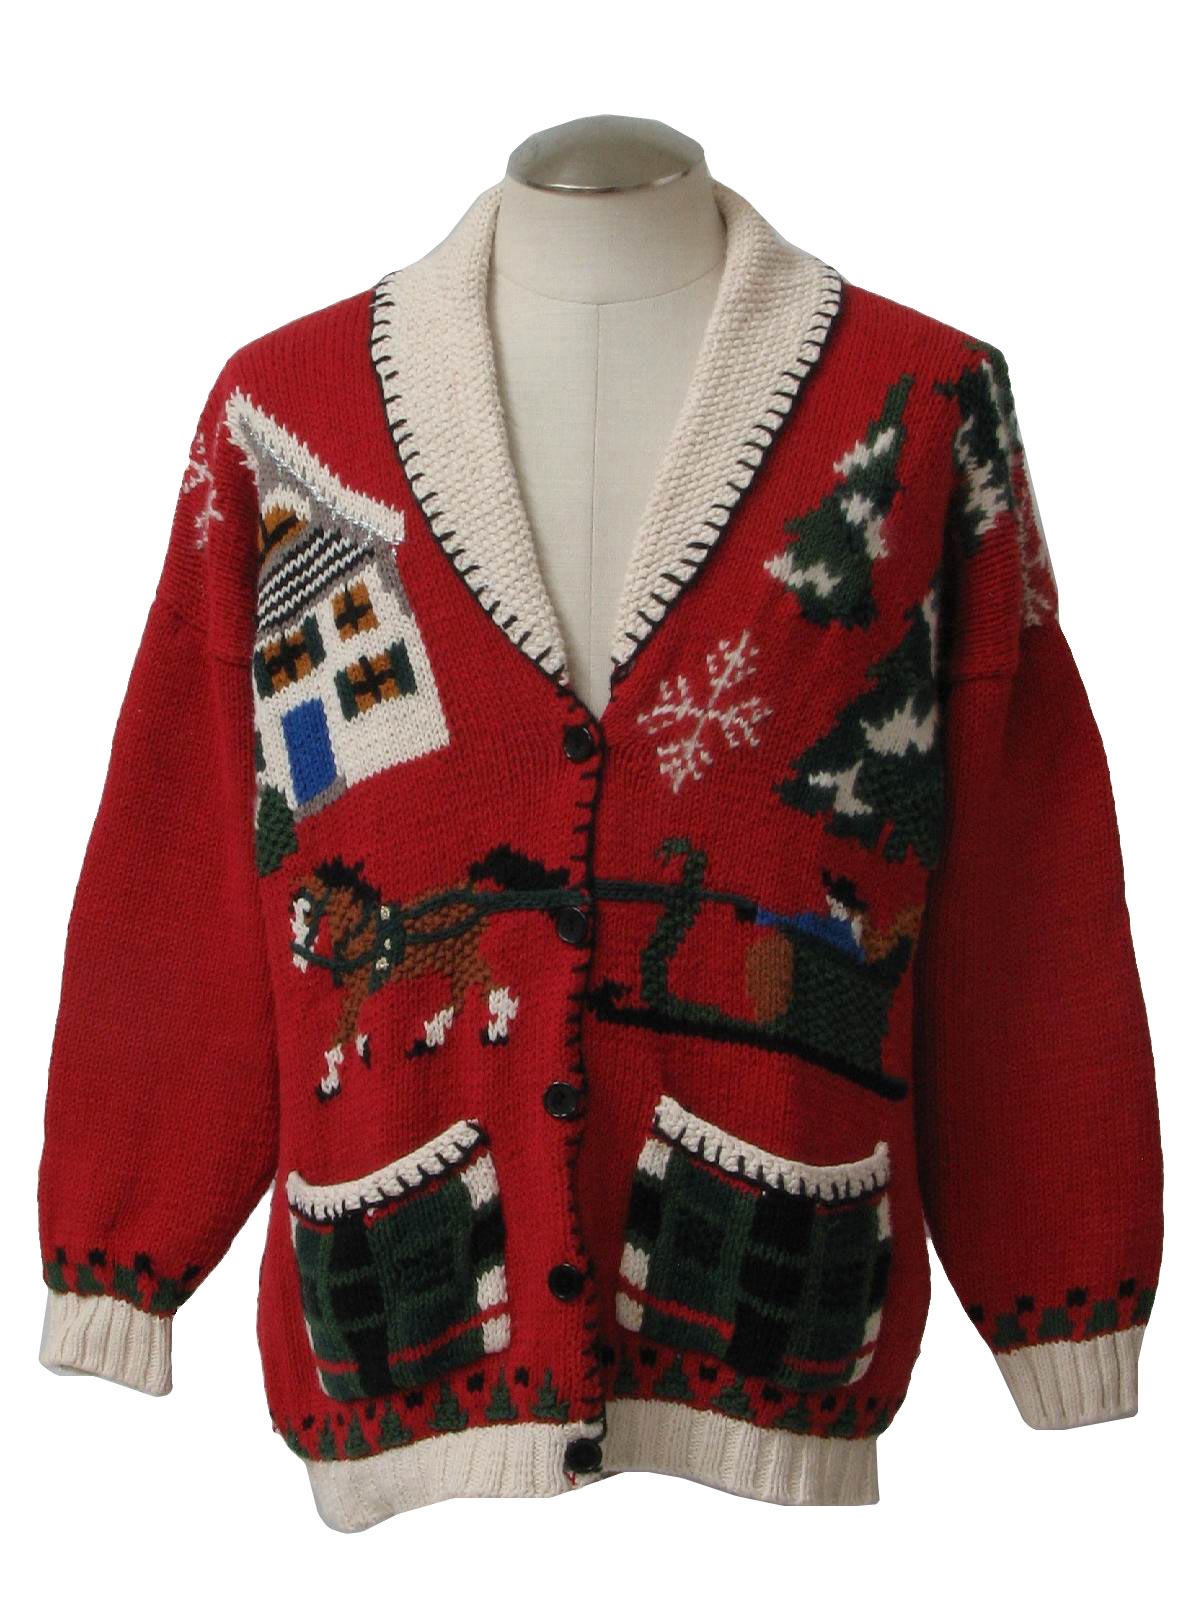 Ugly Christmas Shawl Cardigan 50s inspired Sweater: retro look ...